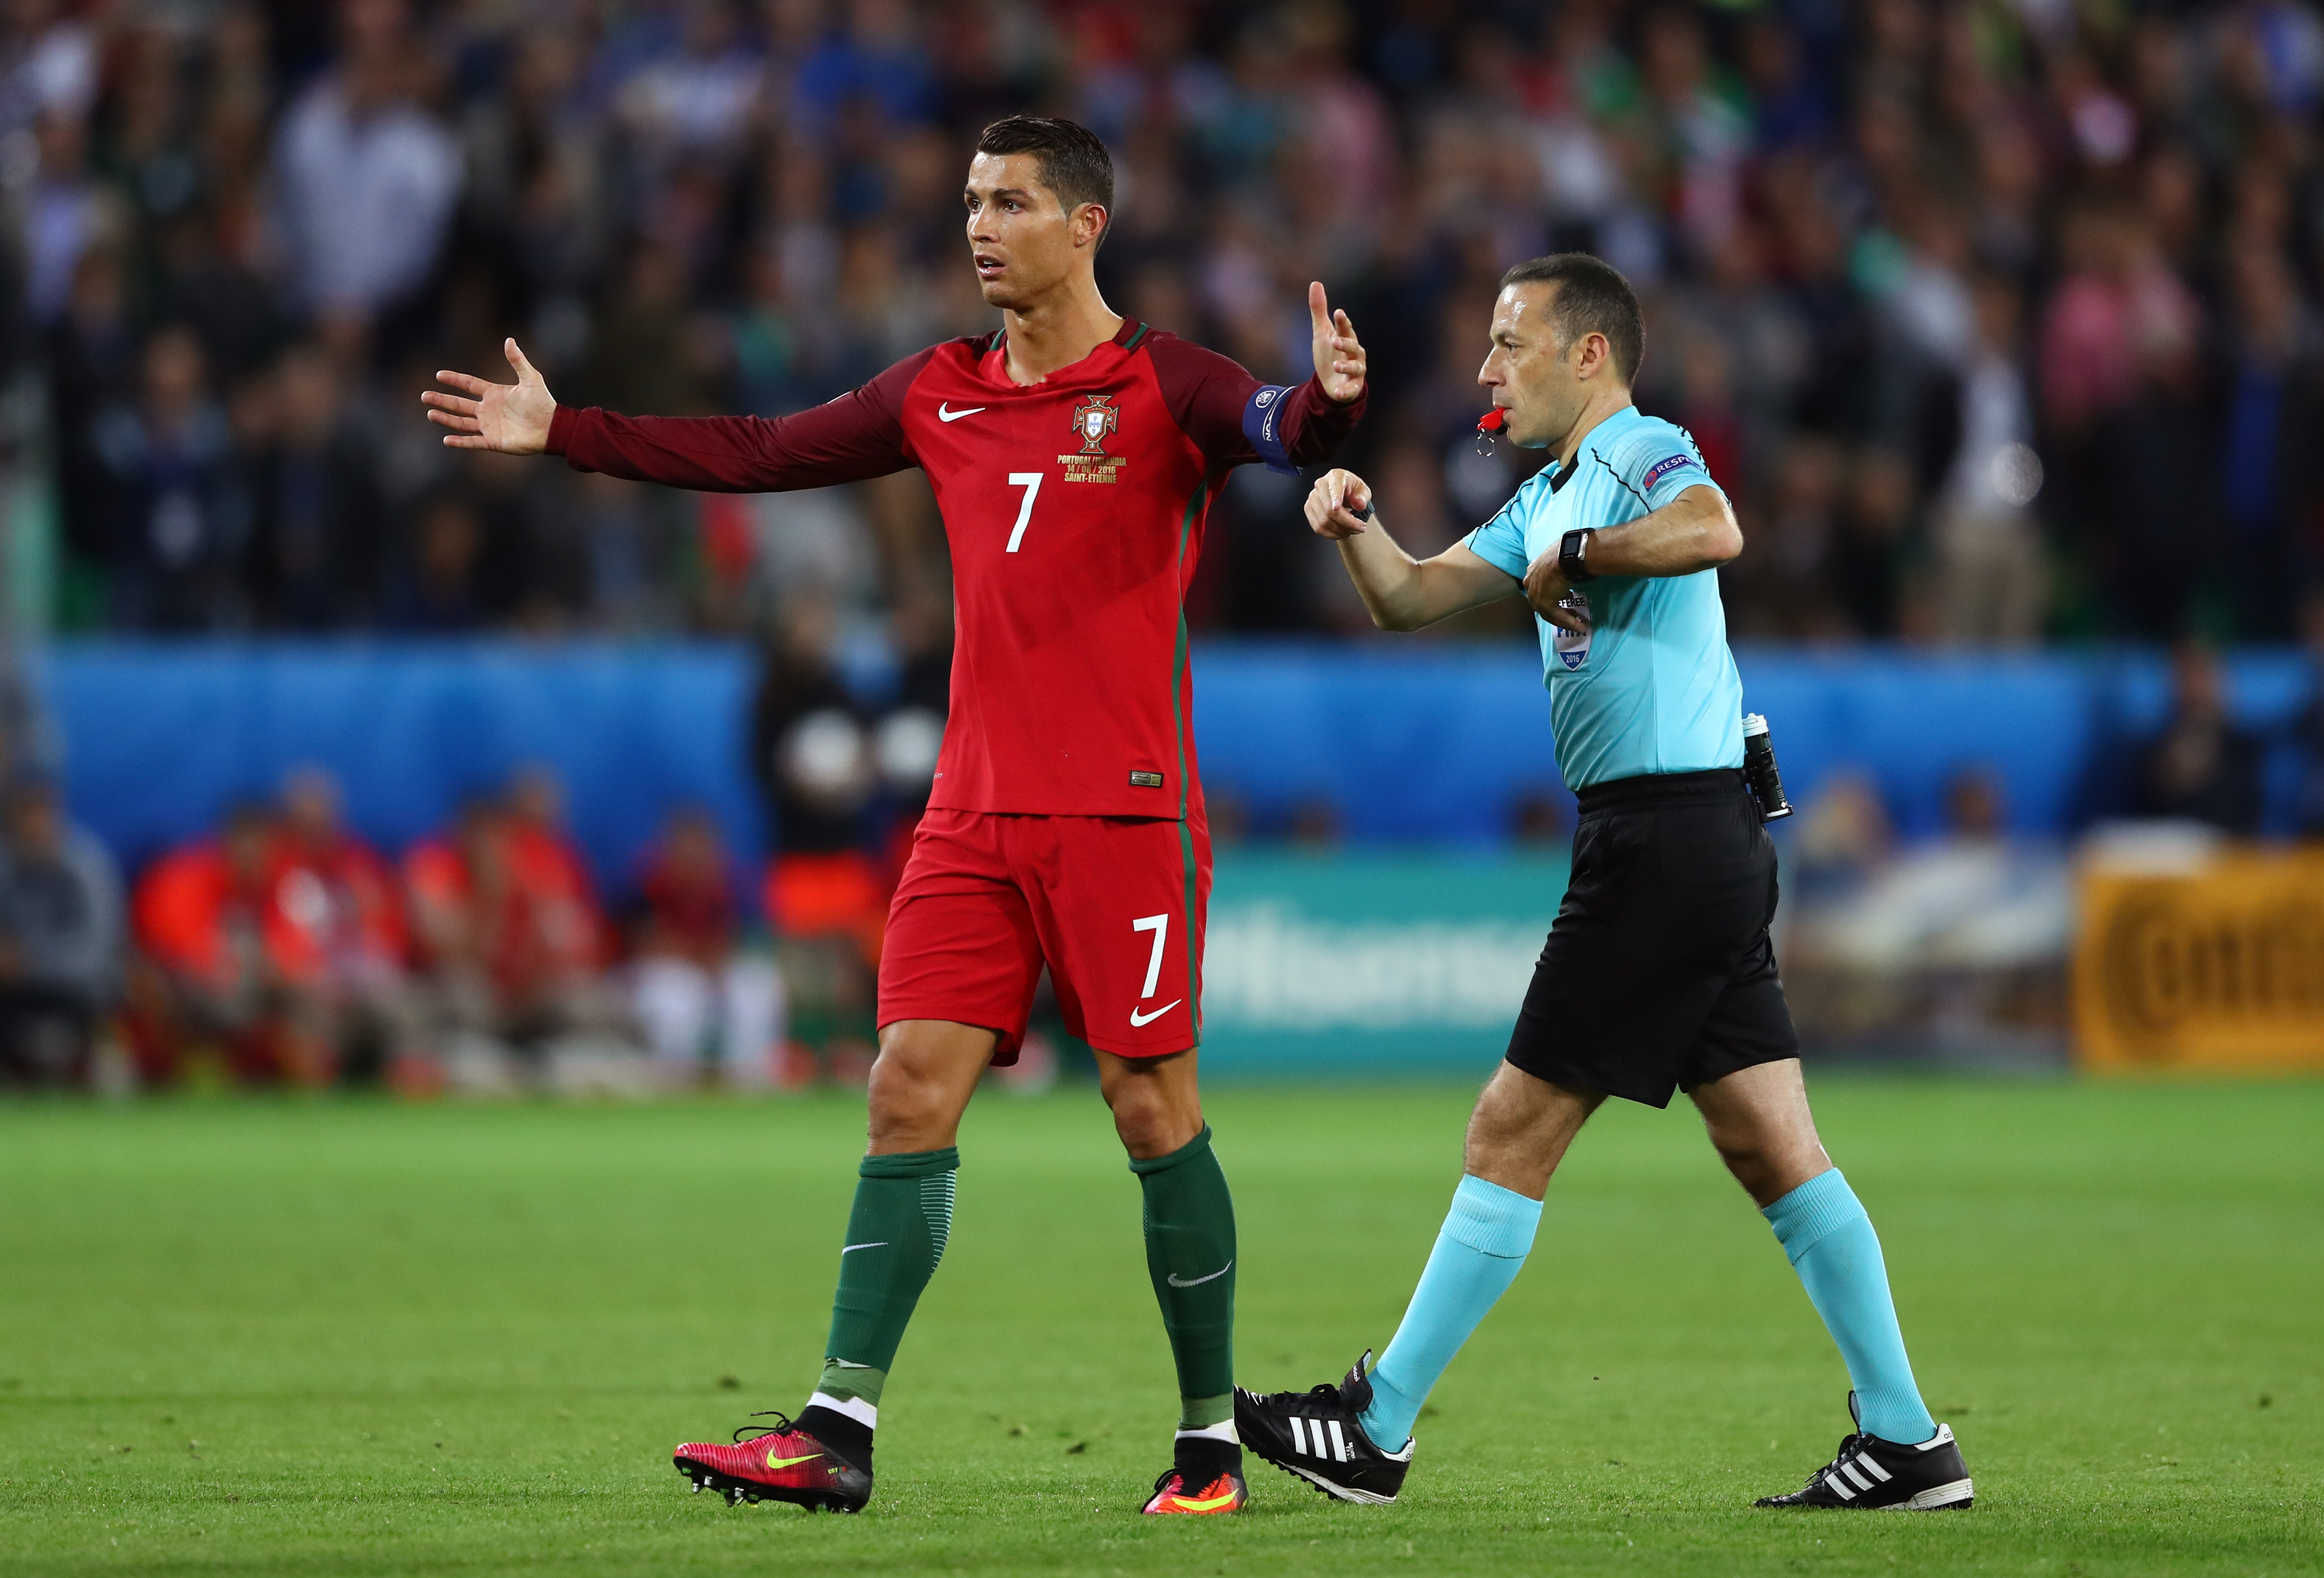 Cristiano Ronaldo slams Iceland for “small mentality” after 1-1 draw